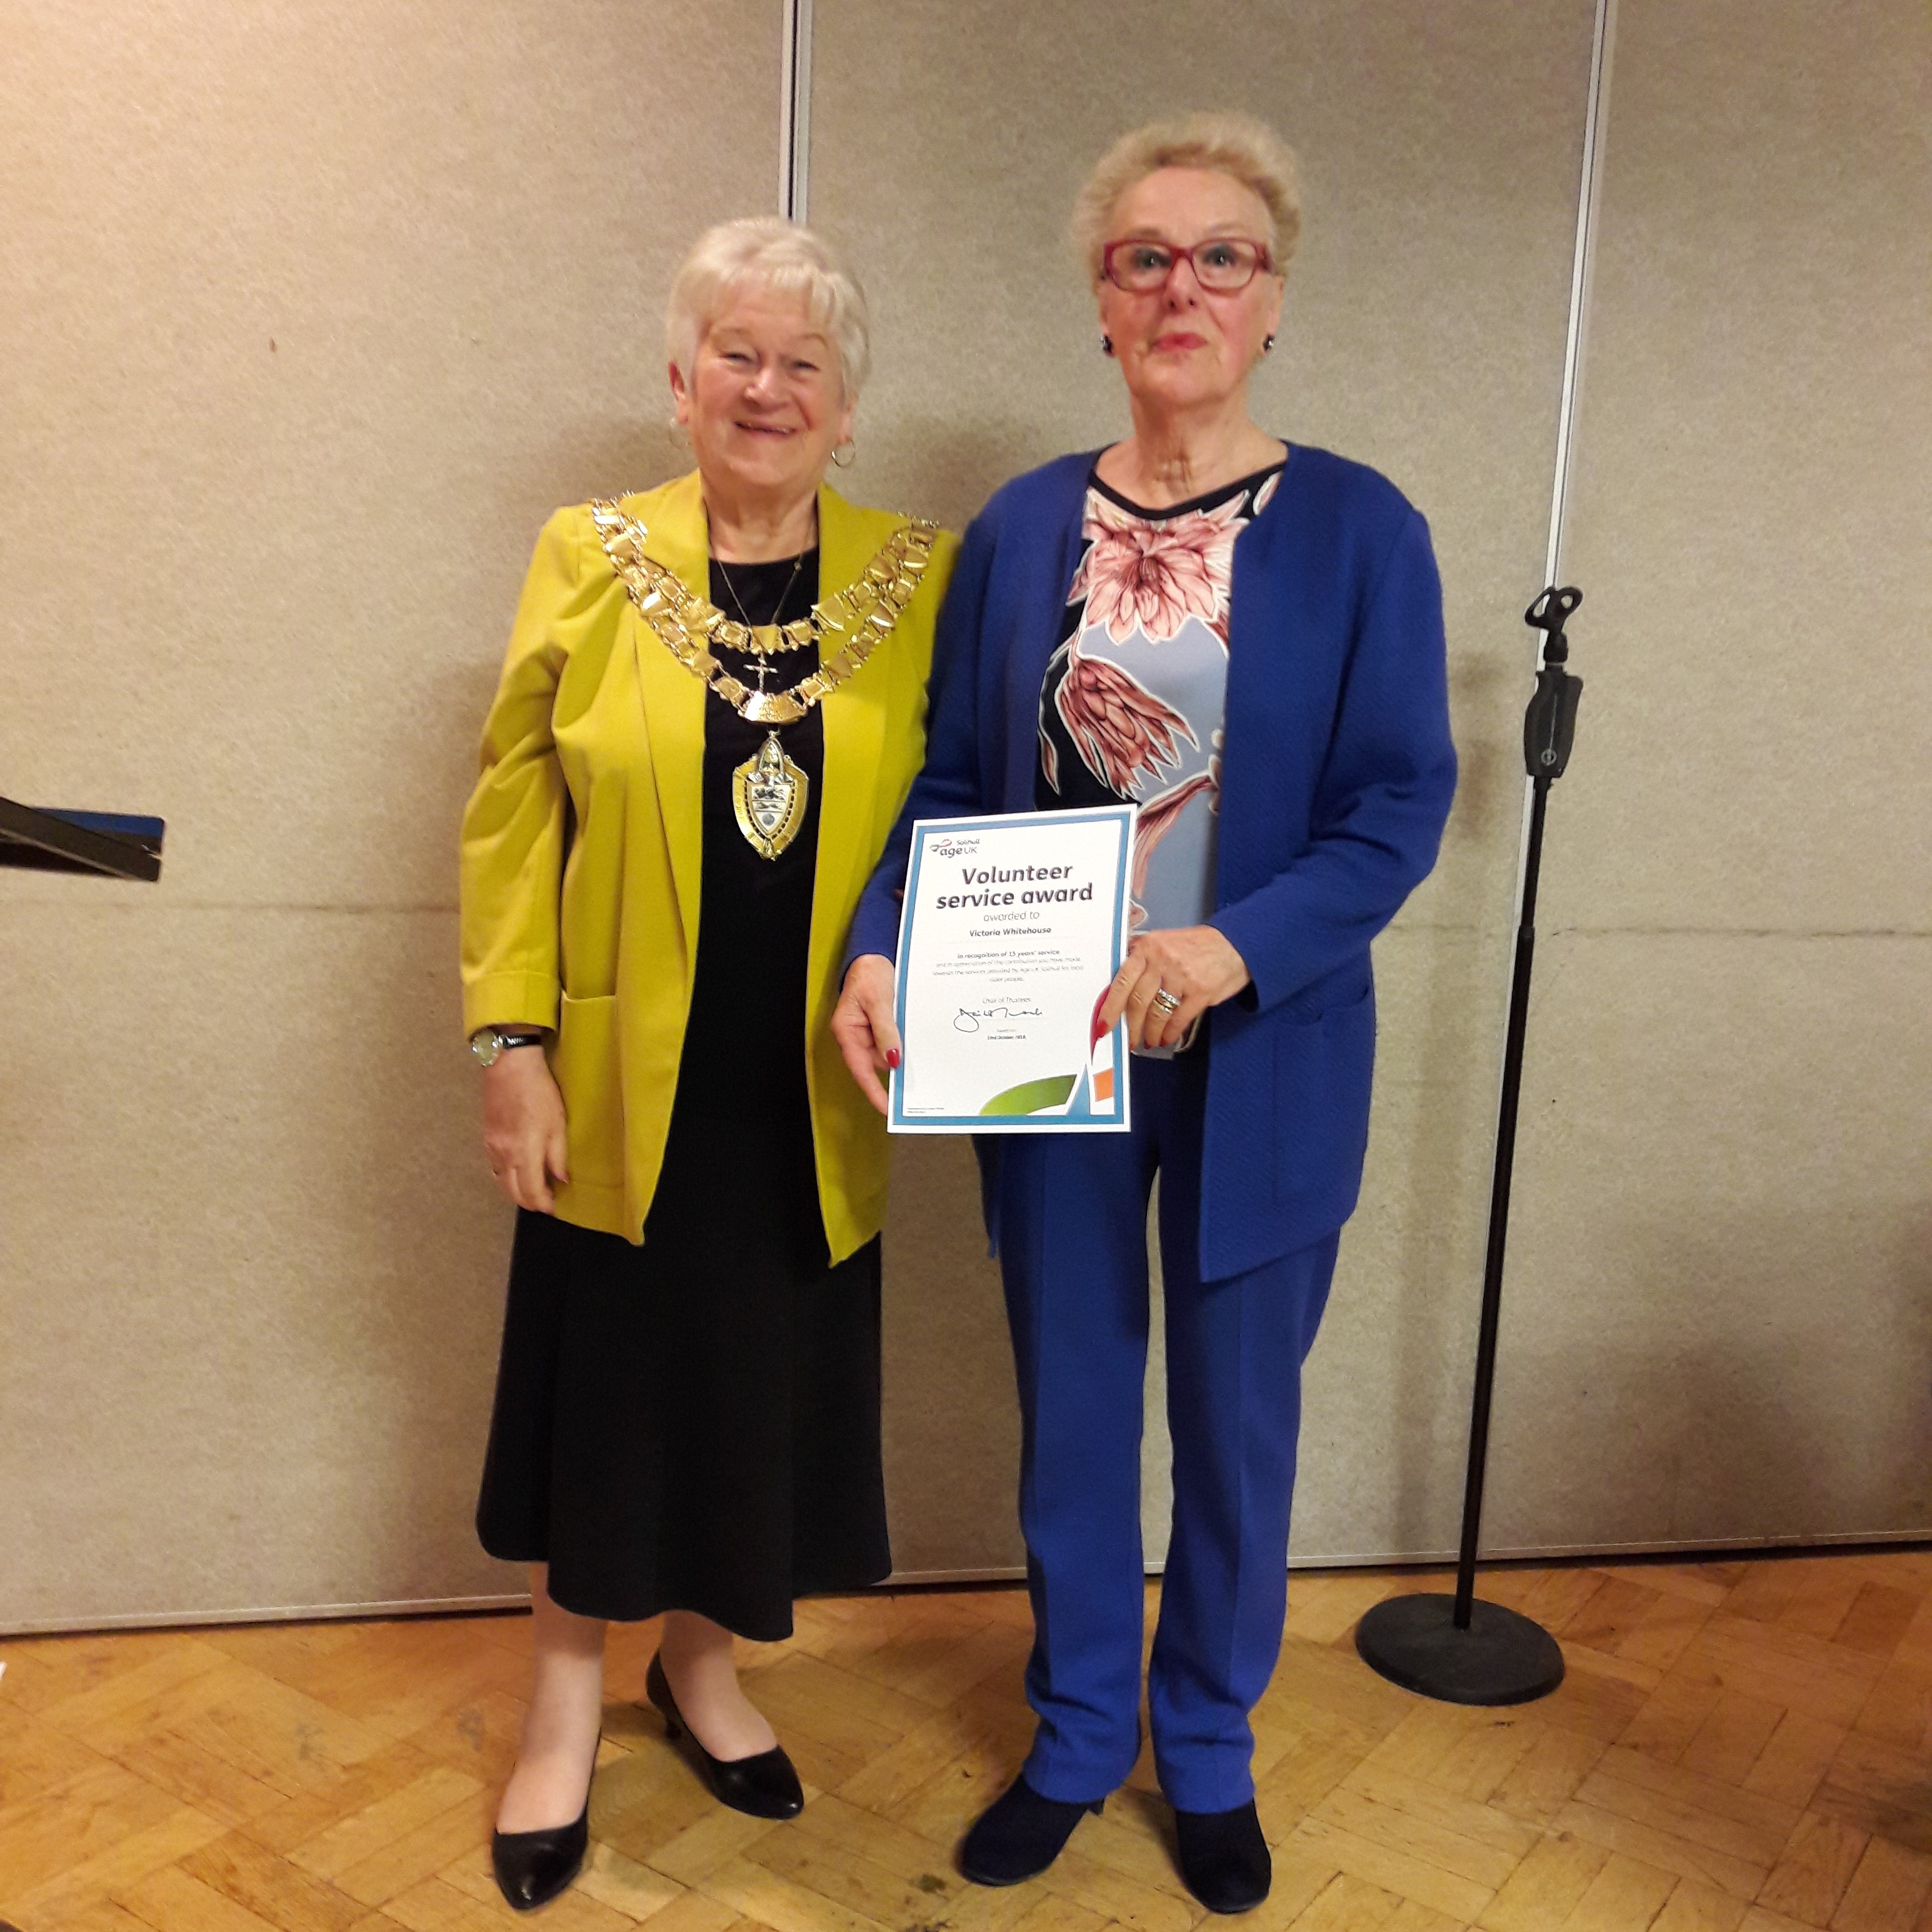 The Mayor of Solihull presenting Victoria with a certificate to mark 15 years of volunteering for Age UK Solihull.